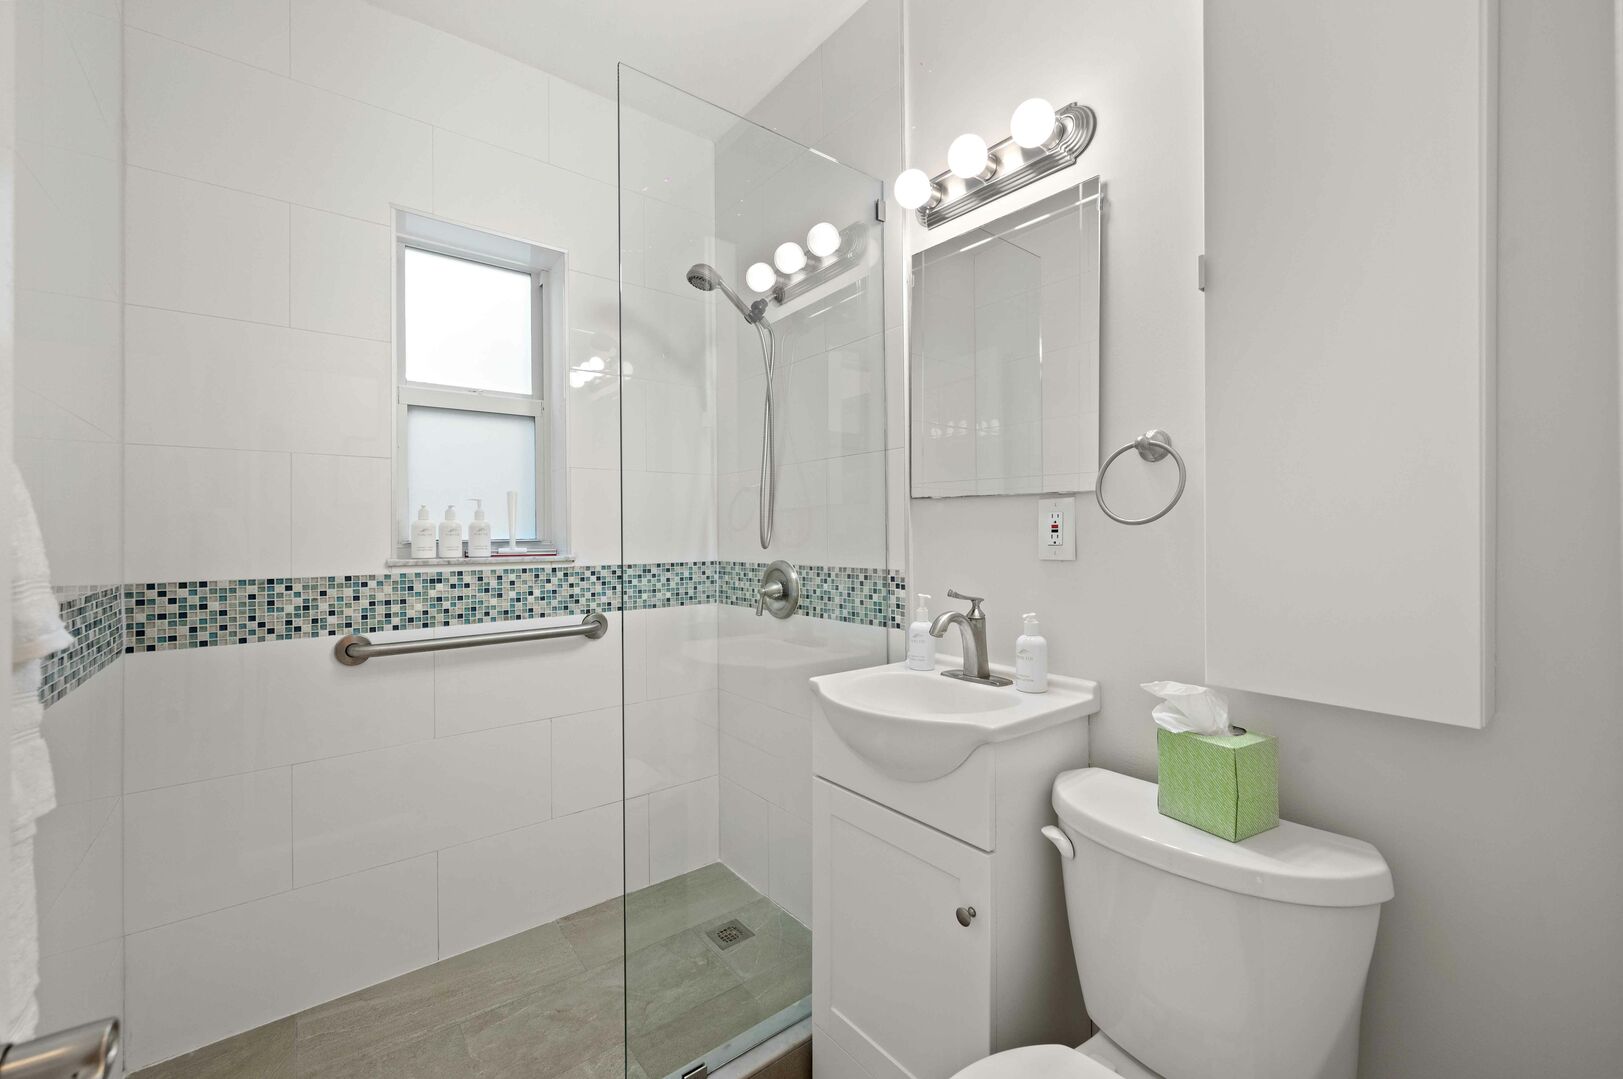 The bathroom features a walk-in shower and plenty of storage space.